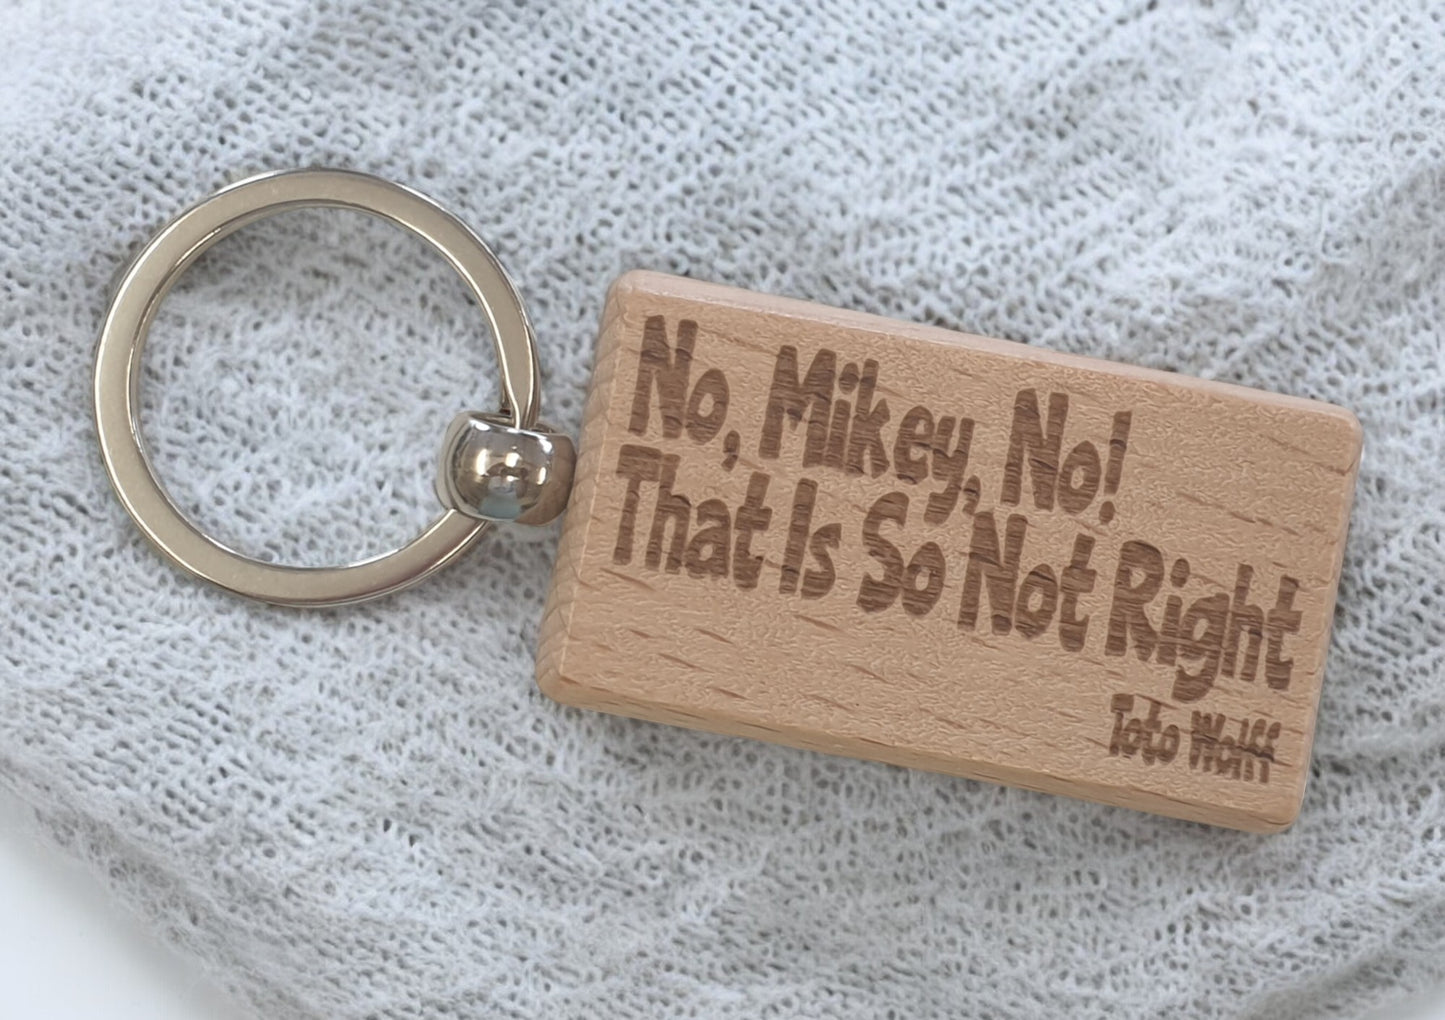 Toto Wolff Keyring Gift No Mikey No That Is So Not Right Engraved Wooden Key Fob Fun Novelty Nice F1 Present